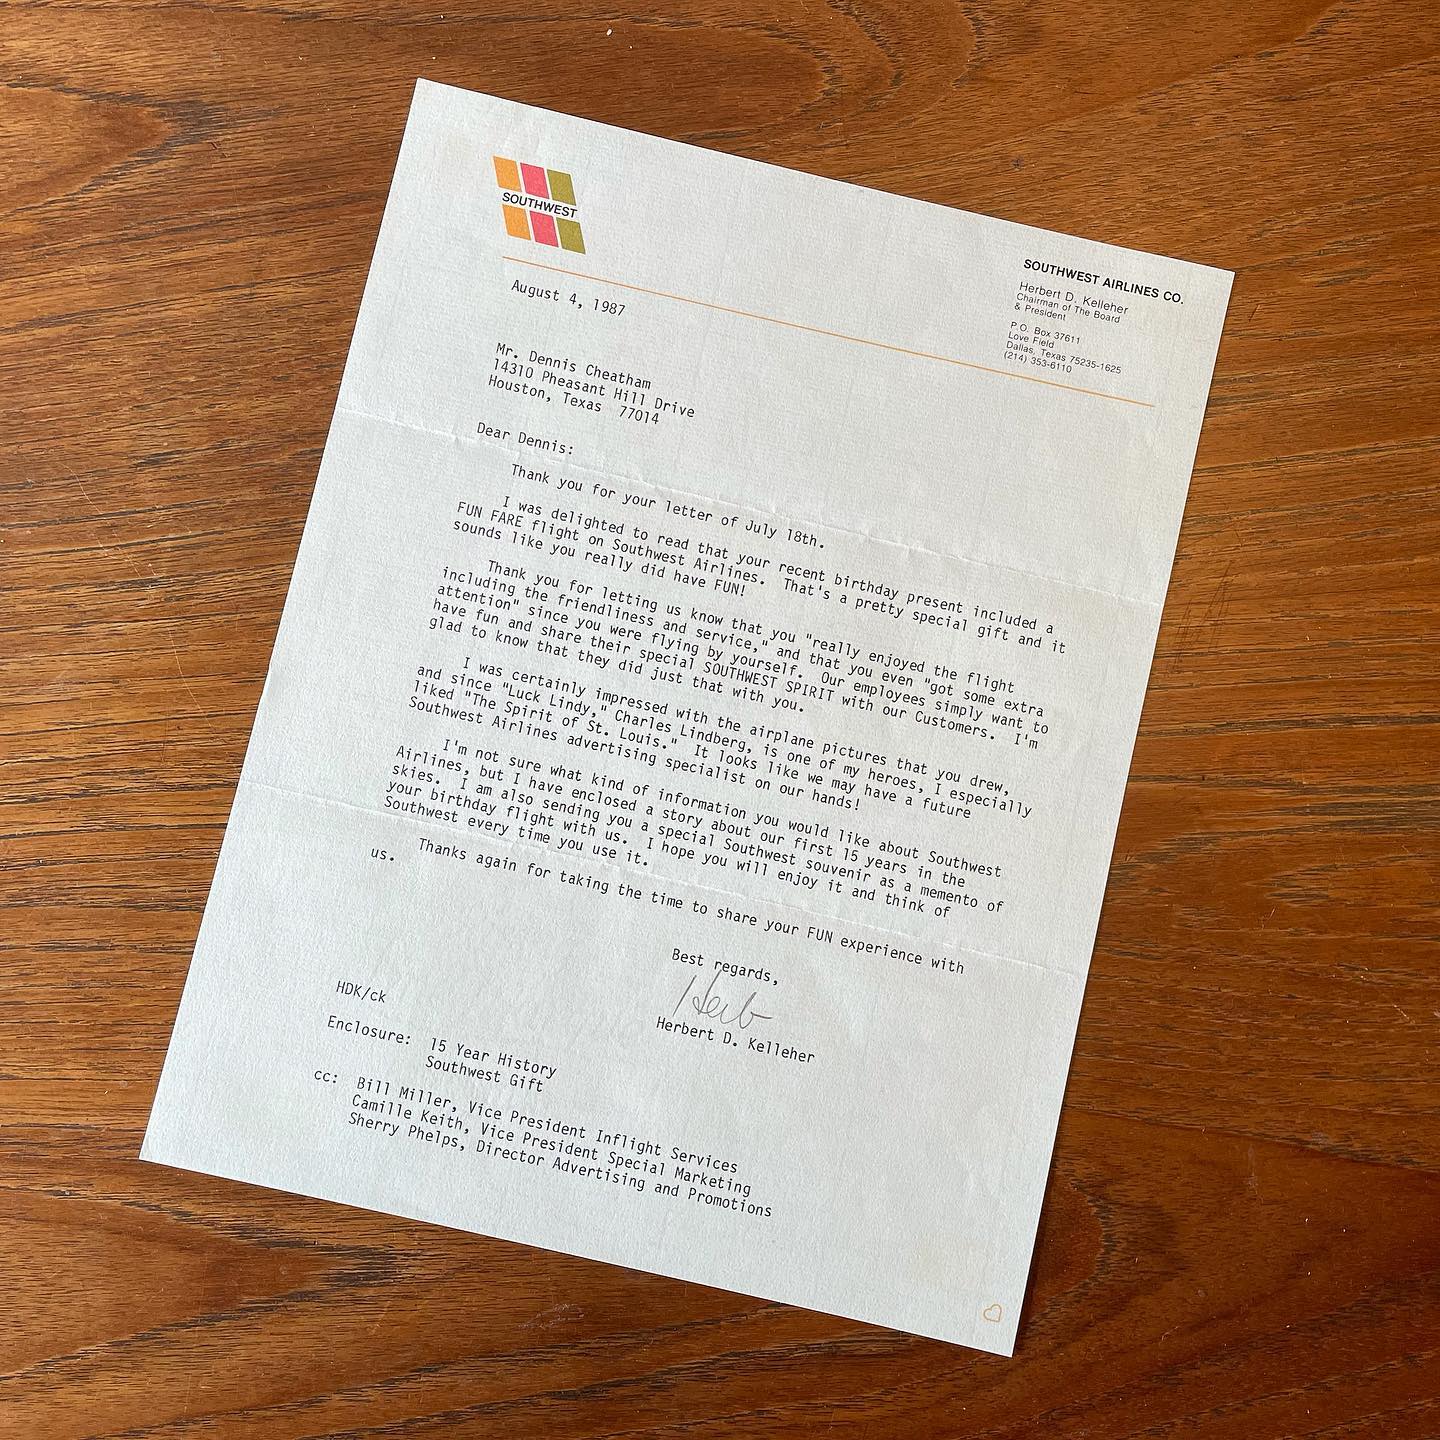 In 1987, I sent a letter thanking @southwestair for an amazing flight experience. 17 days later I received this letter signed “Herb” (and an SWA gift).

12 years later, I worked for Southwest responding to Customer letters like the one I sent ️.

I learned many of the Experience Design concepts I teach in @xdmiamioh at @miamiuniversity while at SWA. This letter reminds me how service design can make people feel special when designers take the time to use care (and LUV).